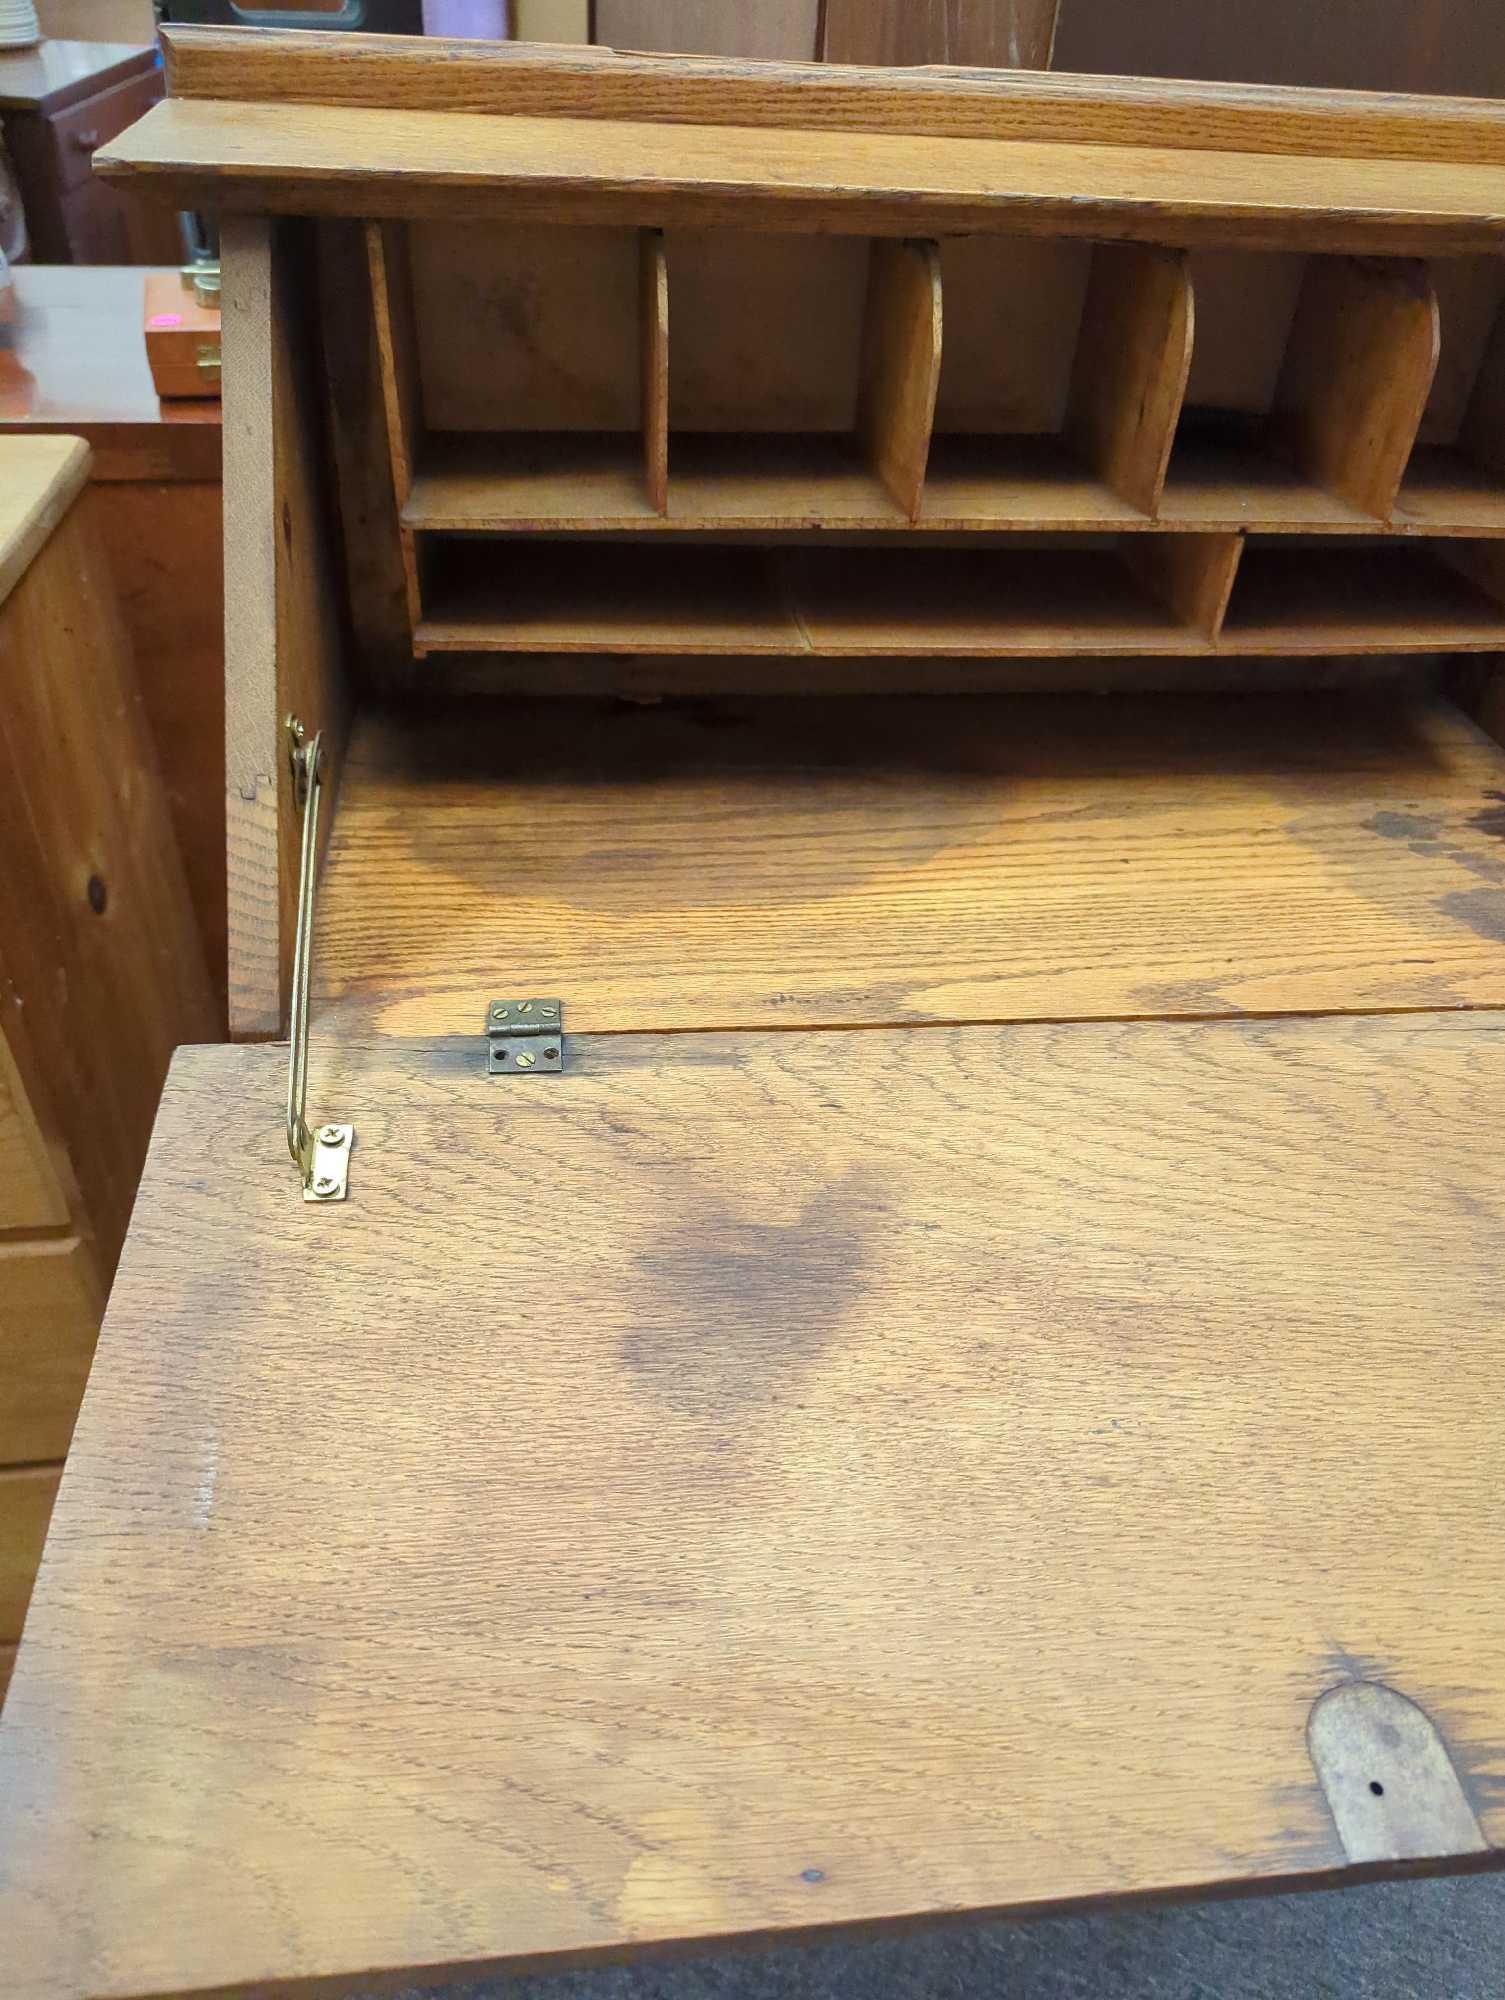 Desk Secretary Antique Drawer Shelf Colonial Book, Show Some Signs Of Aging Has Some Minor Scratches